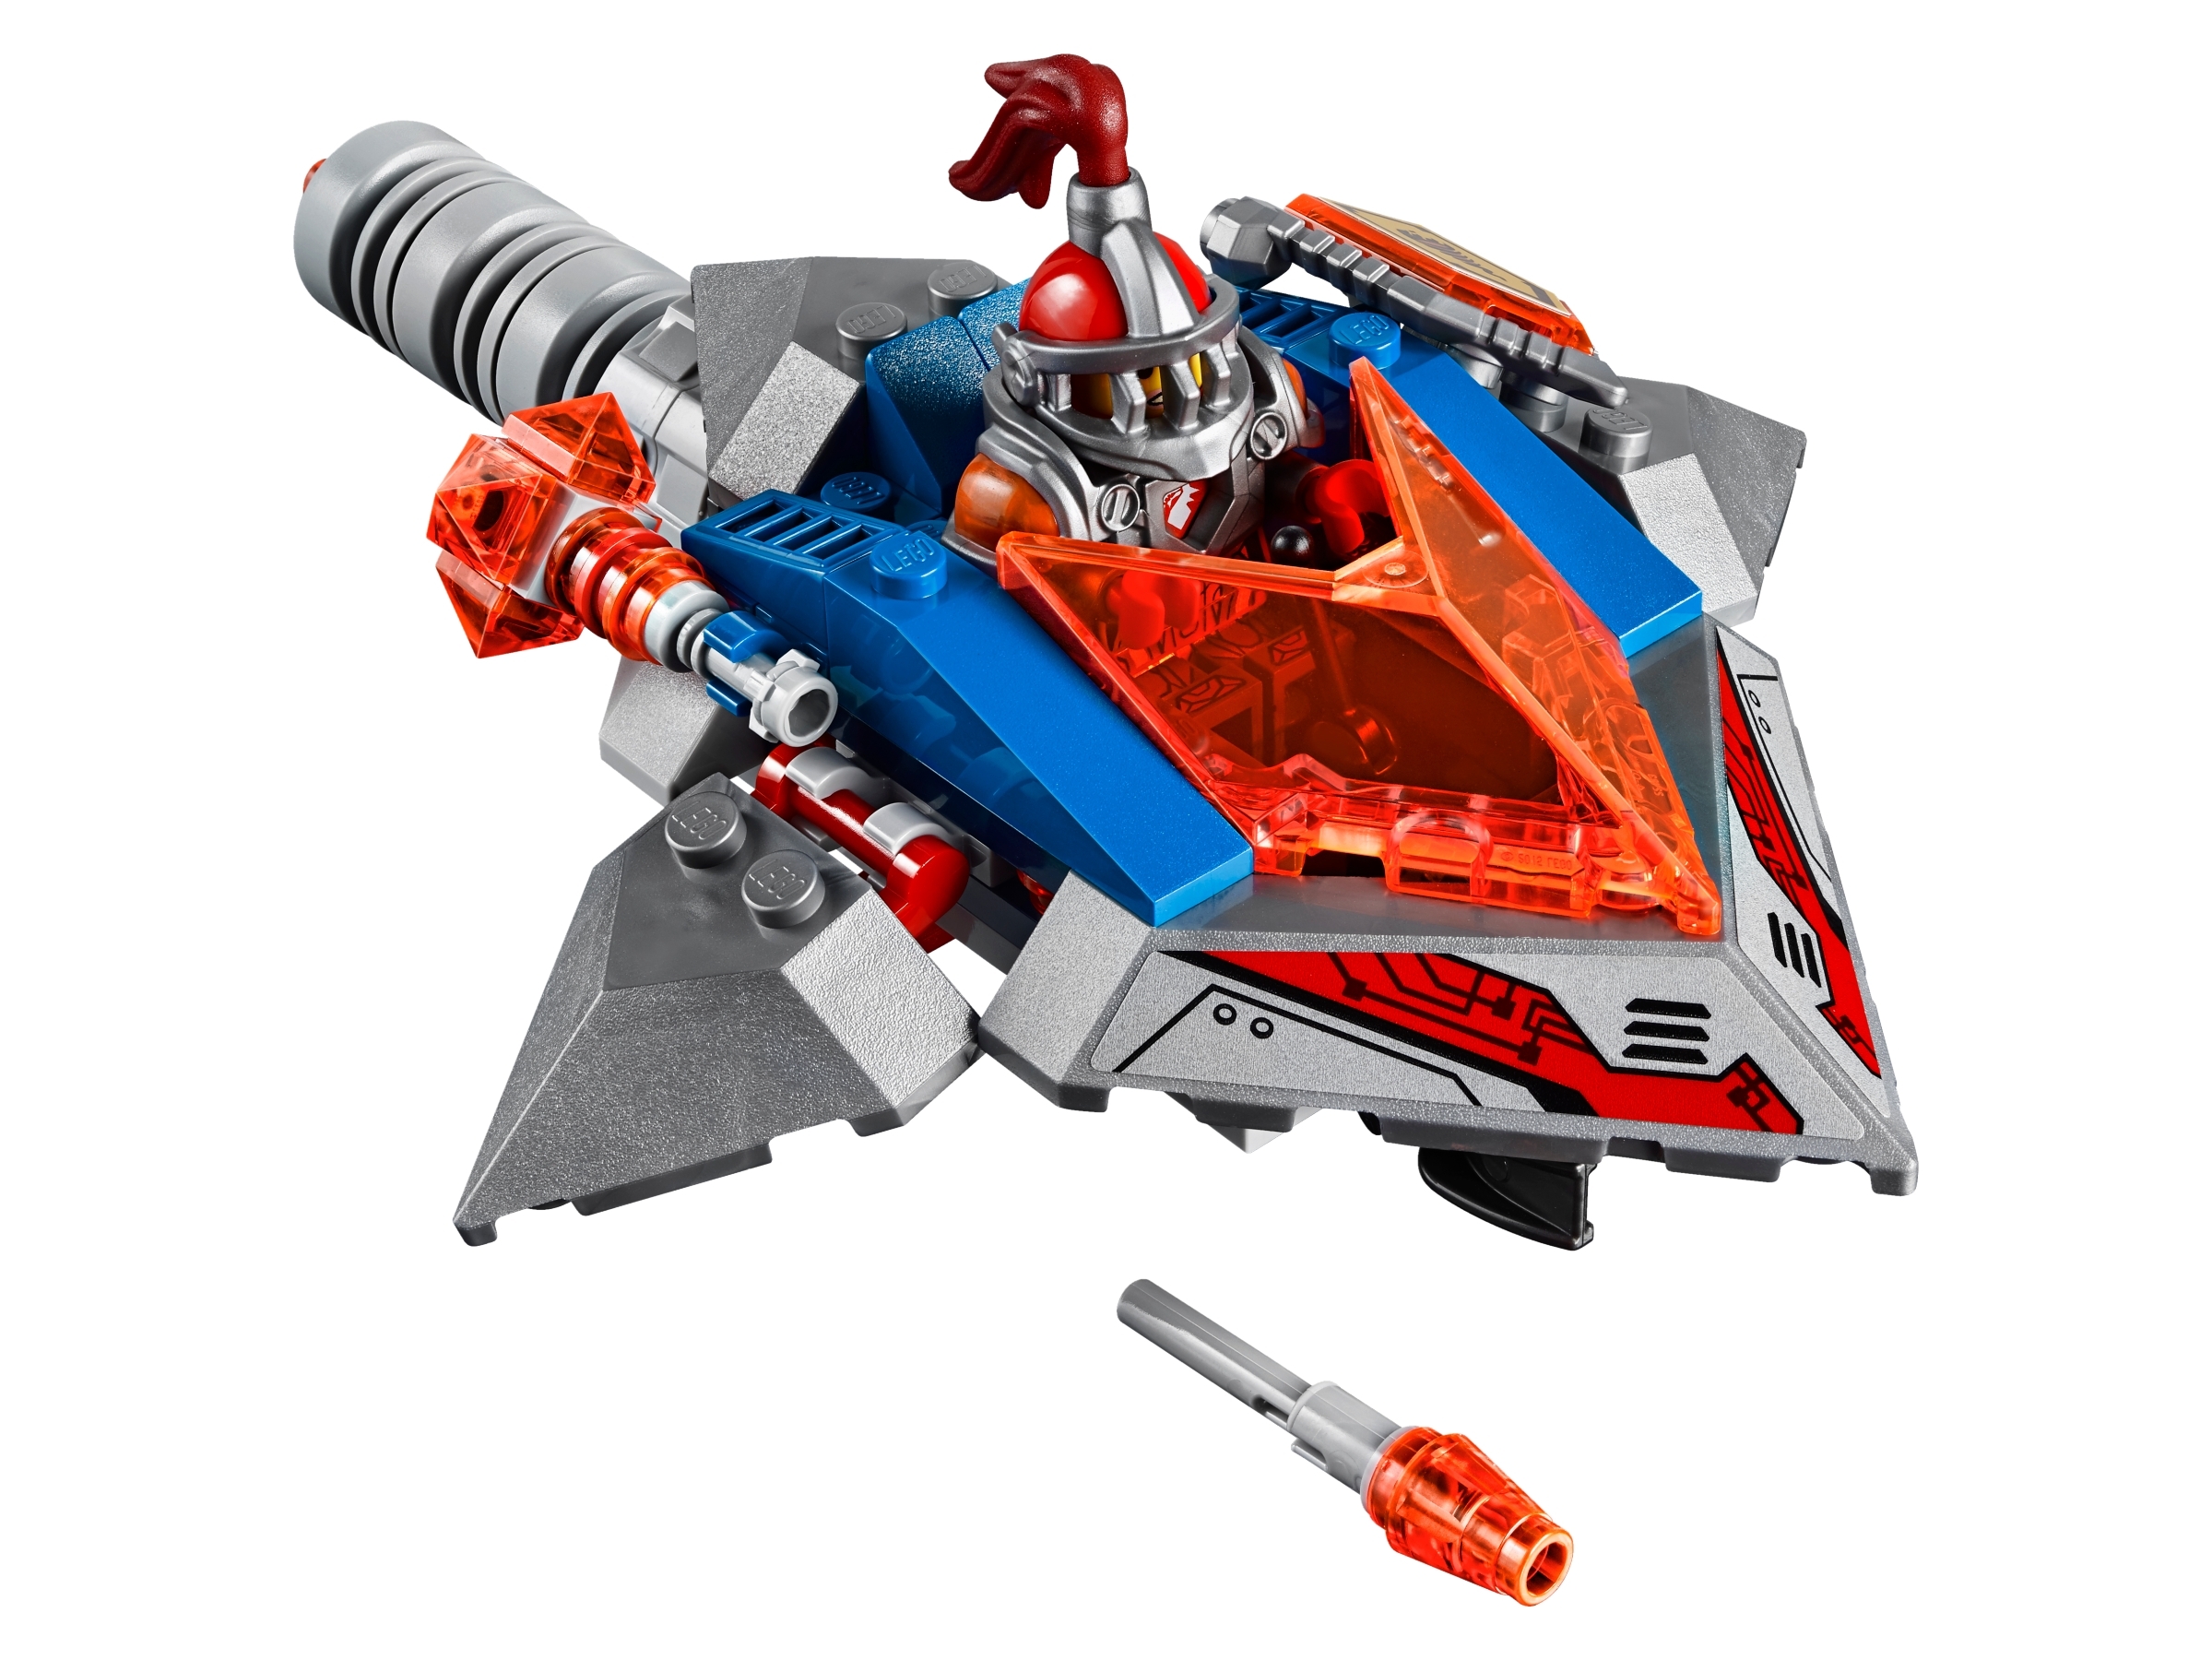 Jestro's Volcano Lair 70323 | NEXO KNIGHTS™ | online the Official Shop US